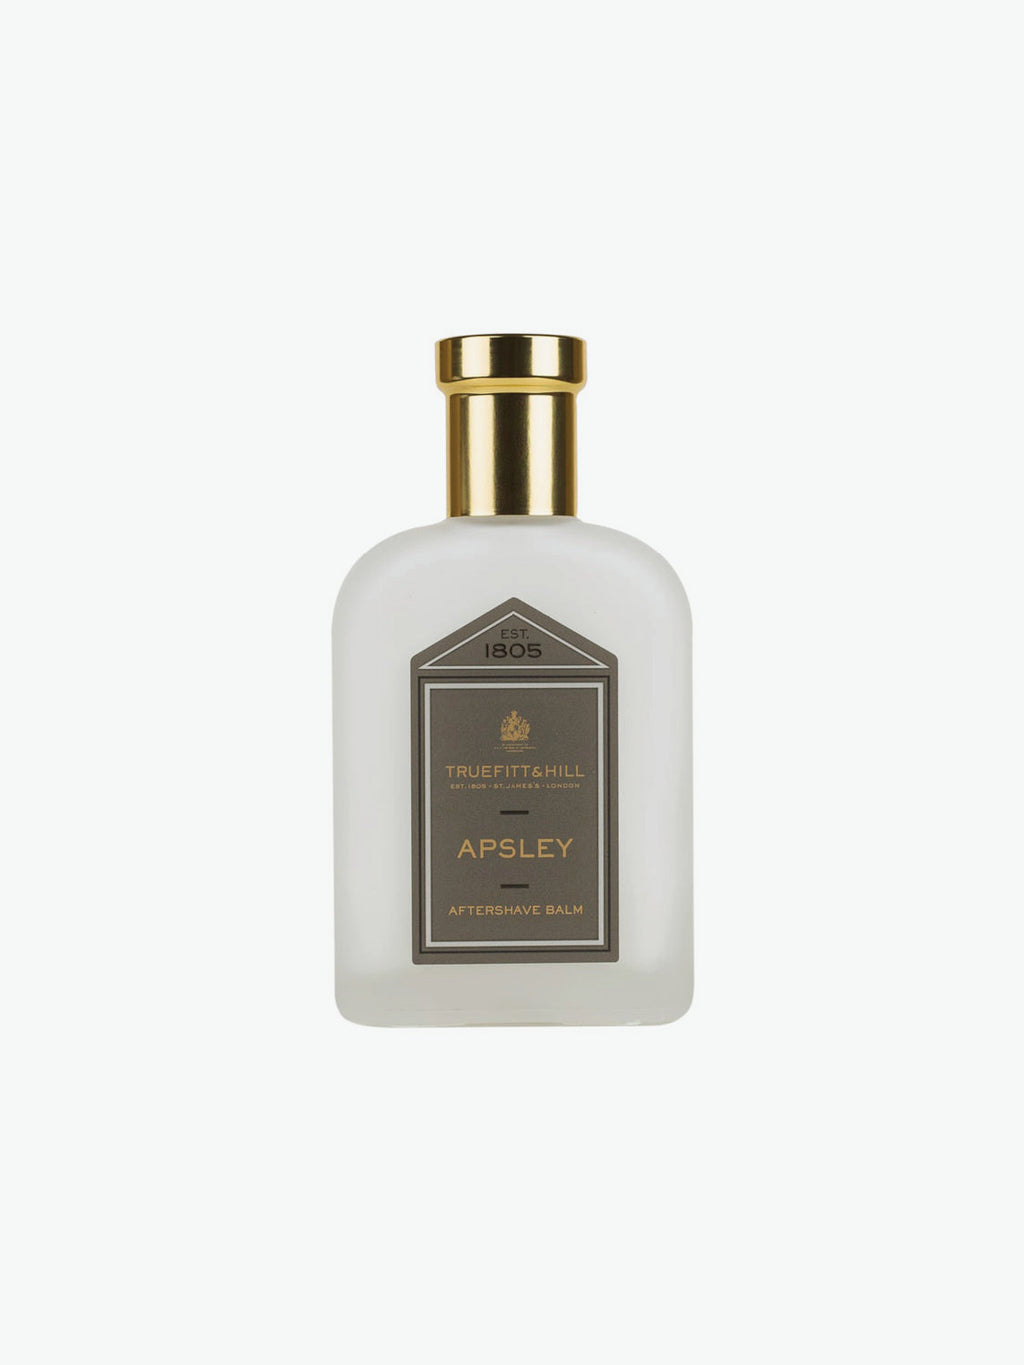 Truefitt And Hill Apsley Aftershave Balm | A